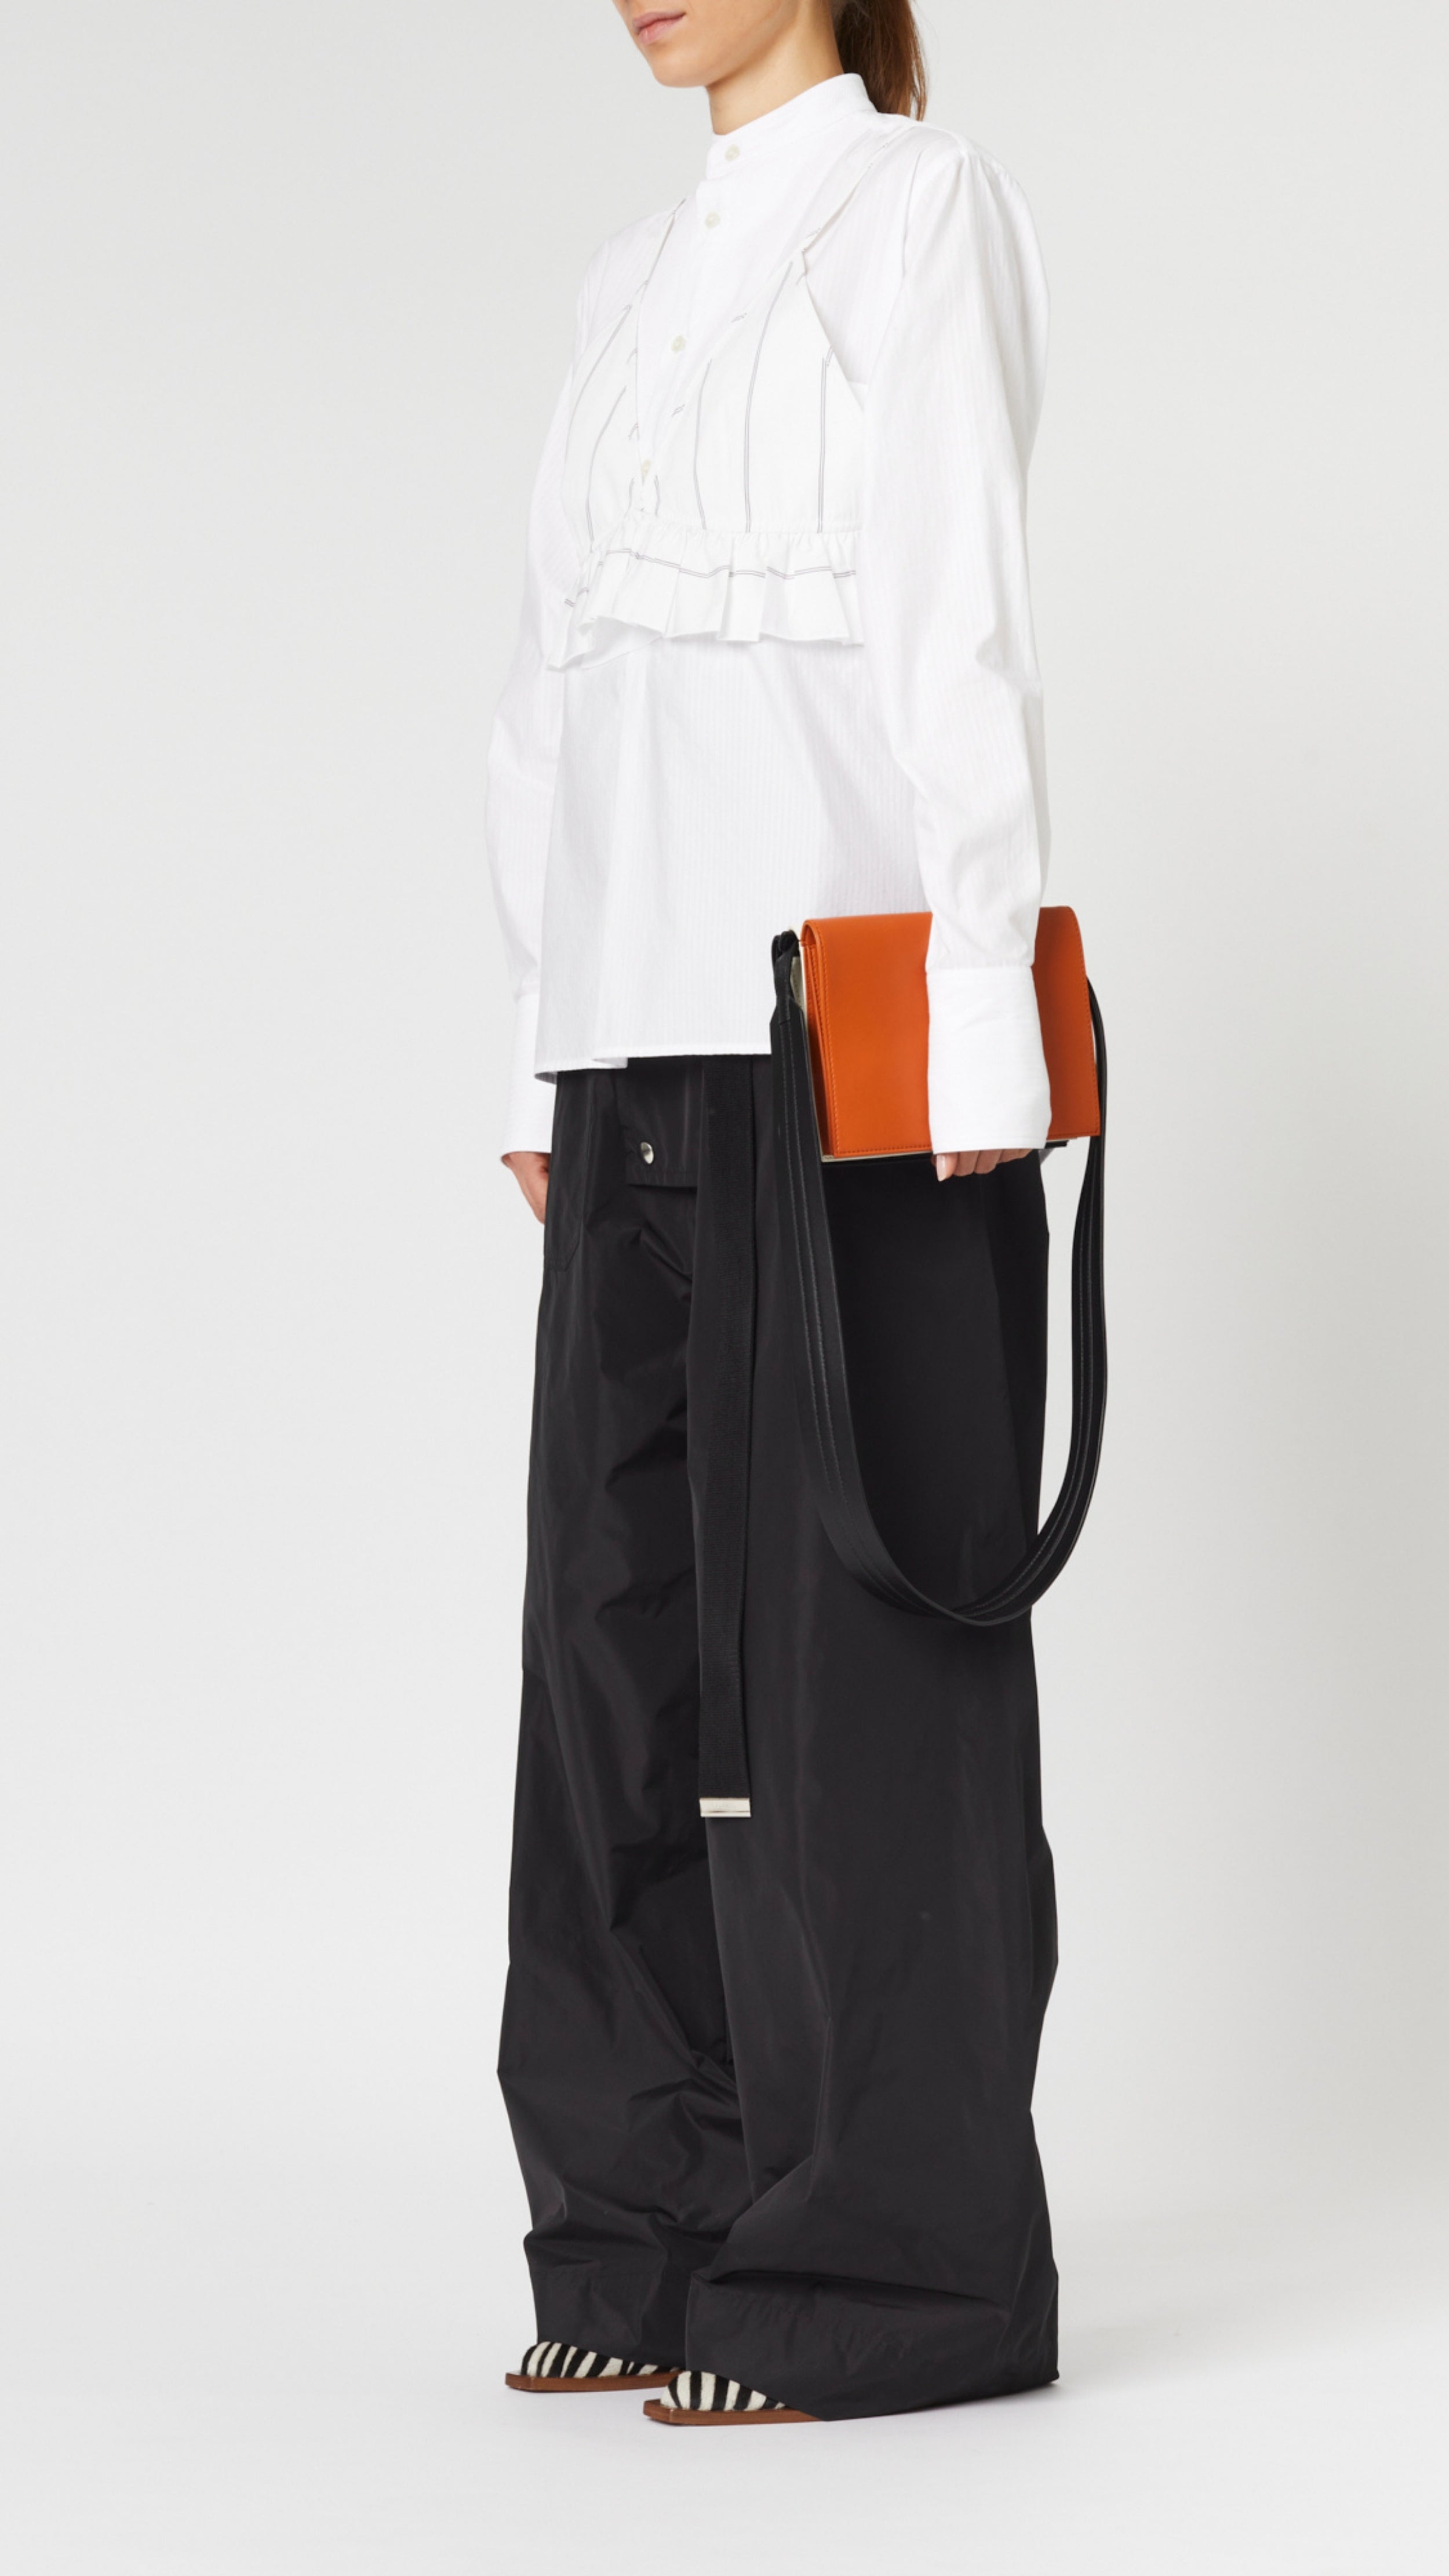 Plan C Tri Color Leather Crossbody Bag. Crafted from fine italian leather in black, white and camel. It has an adjustable black strap. Product shown with model.